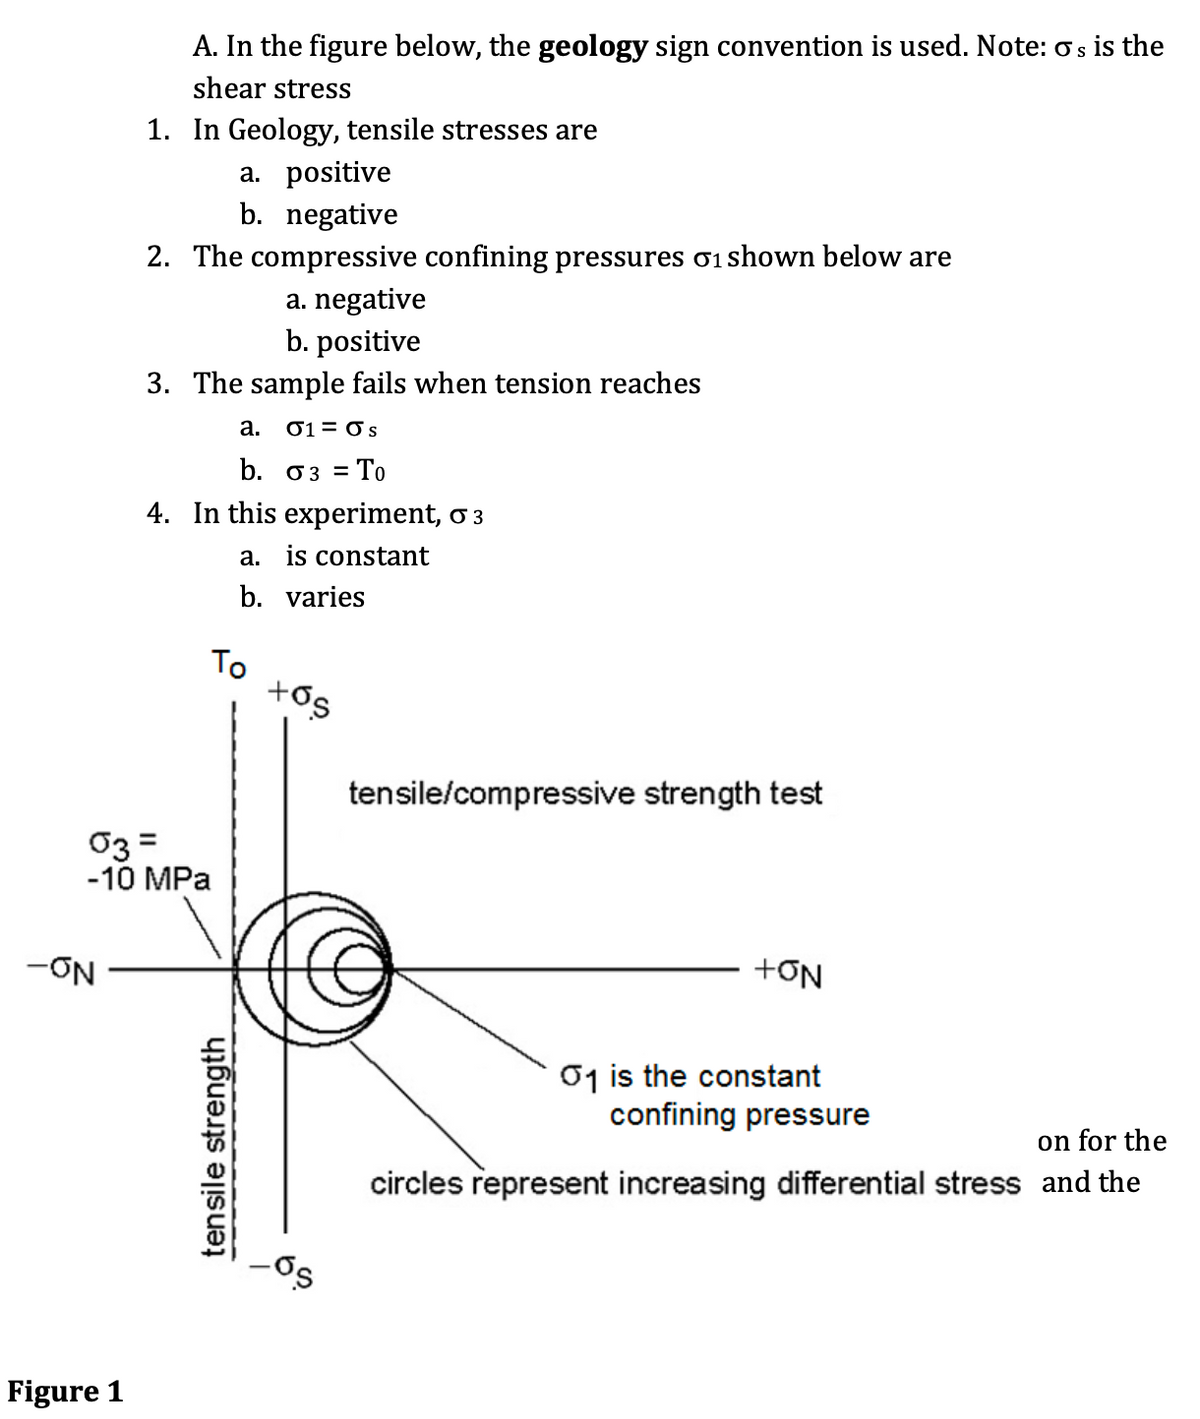 A. In the figure below, the geology sign convention is used. Note: os is the
shear stress
1. In Geology, tensile stresses are
a. positive
b. negative
2. The compressive confining pressures o1shown below are
a. negative
b. positive
3. The sample fails when tension reaches
a.
01 = s
b. 03 = To
4. In this experiment, o 3
a. is constant
b. varies
To
+os
tensile/compressive strength test
03 =
-10 MPа
-ON
+ON
01 is the constant
confining pressure
on for the
circles represent increasing differential stress and the
Figure 1
tensile strength
